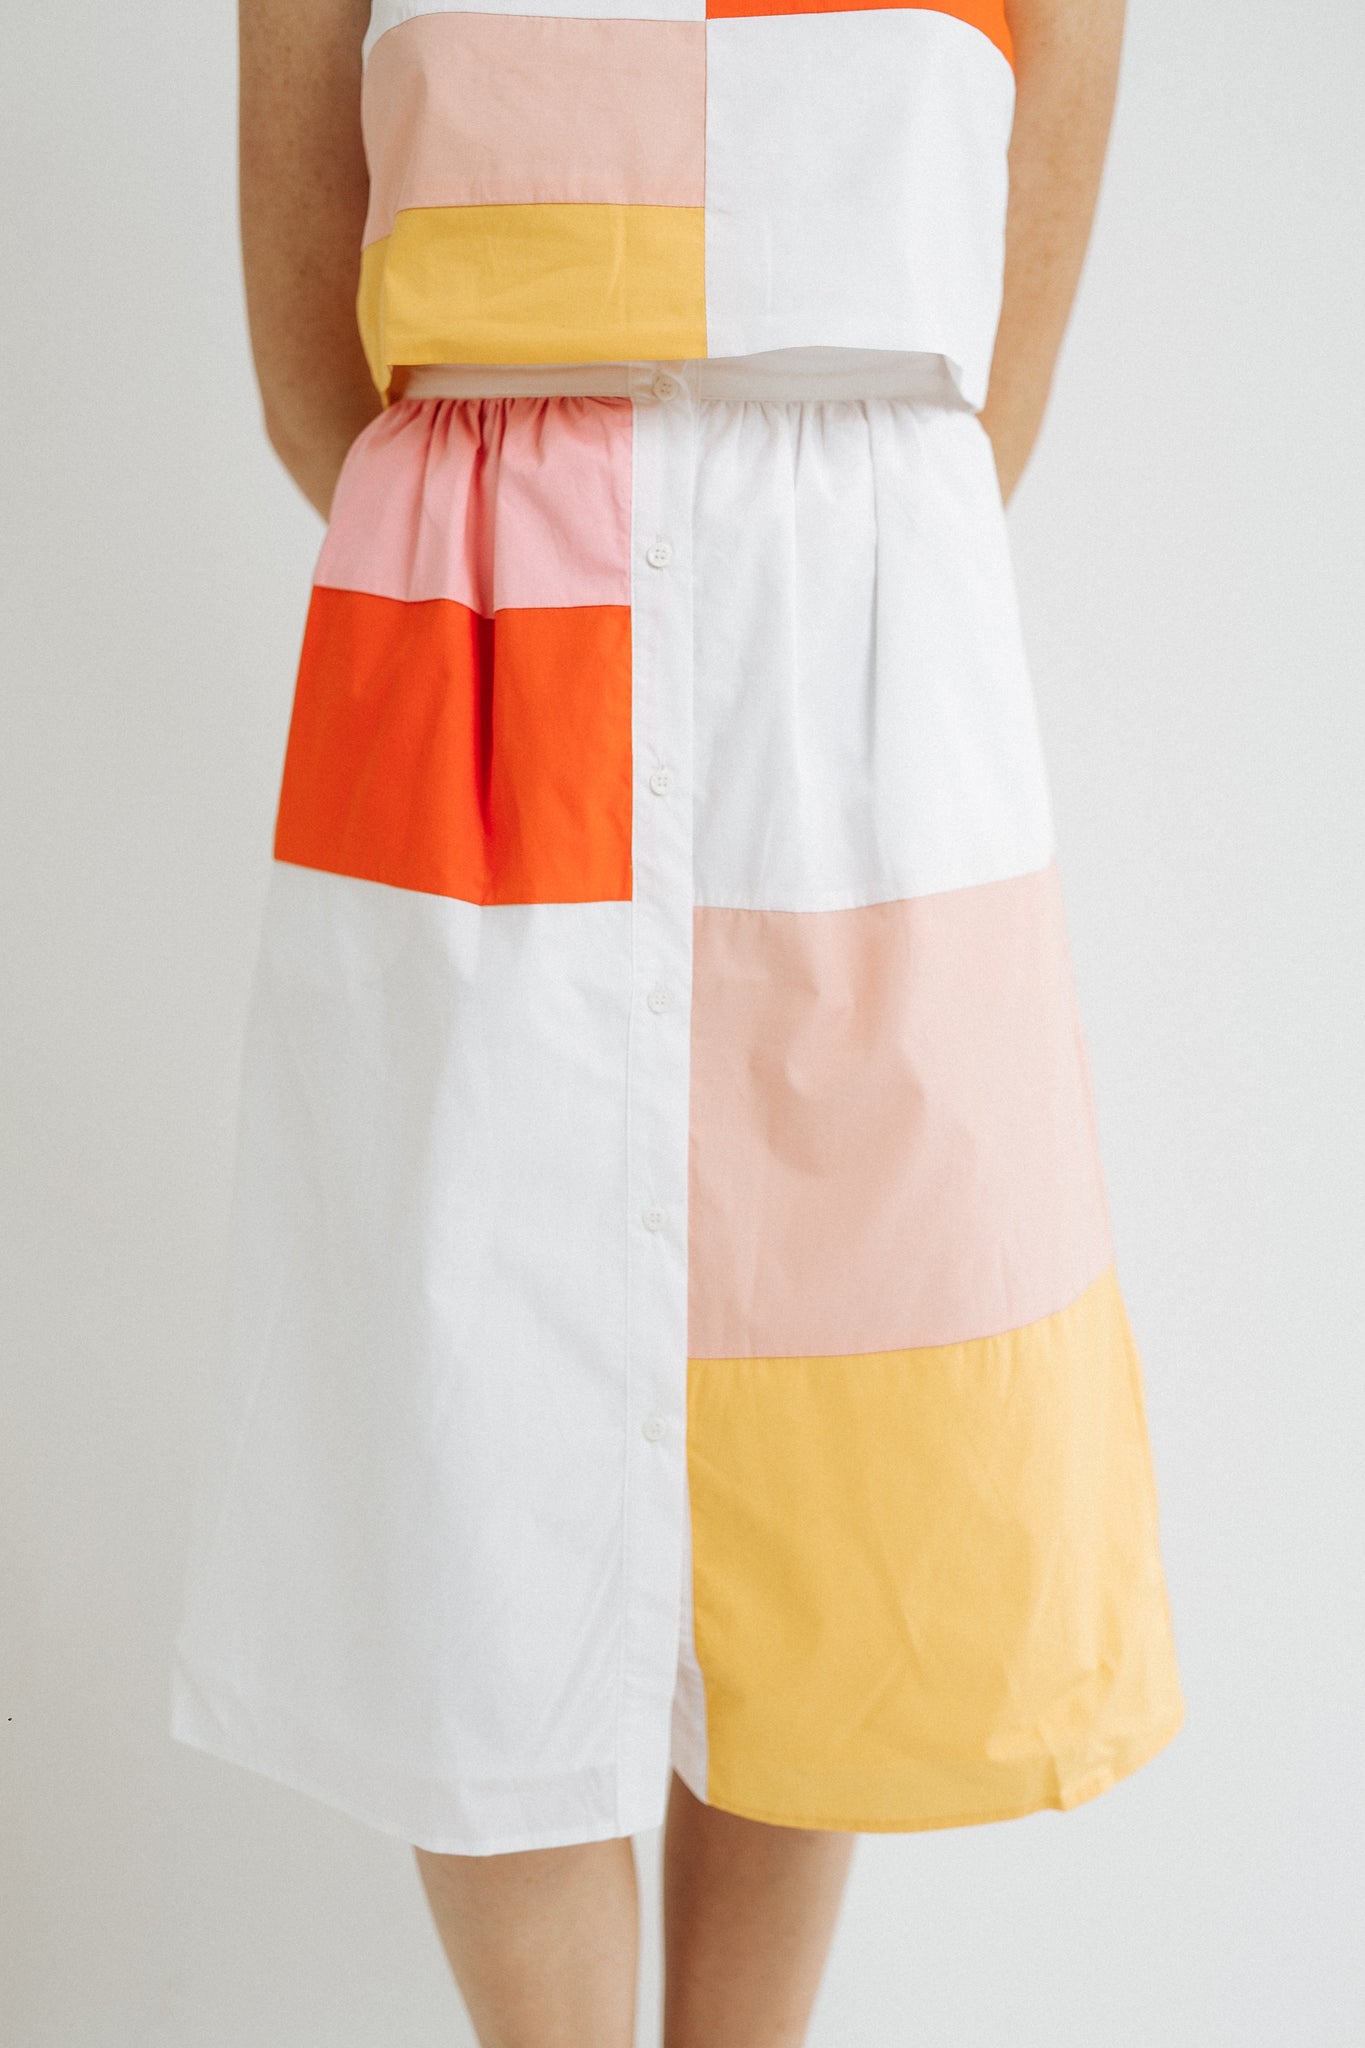 The Colorblock Skirt